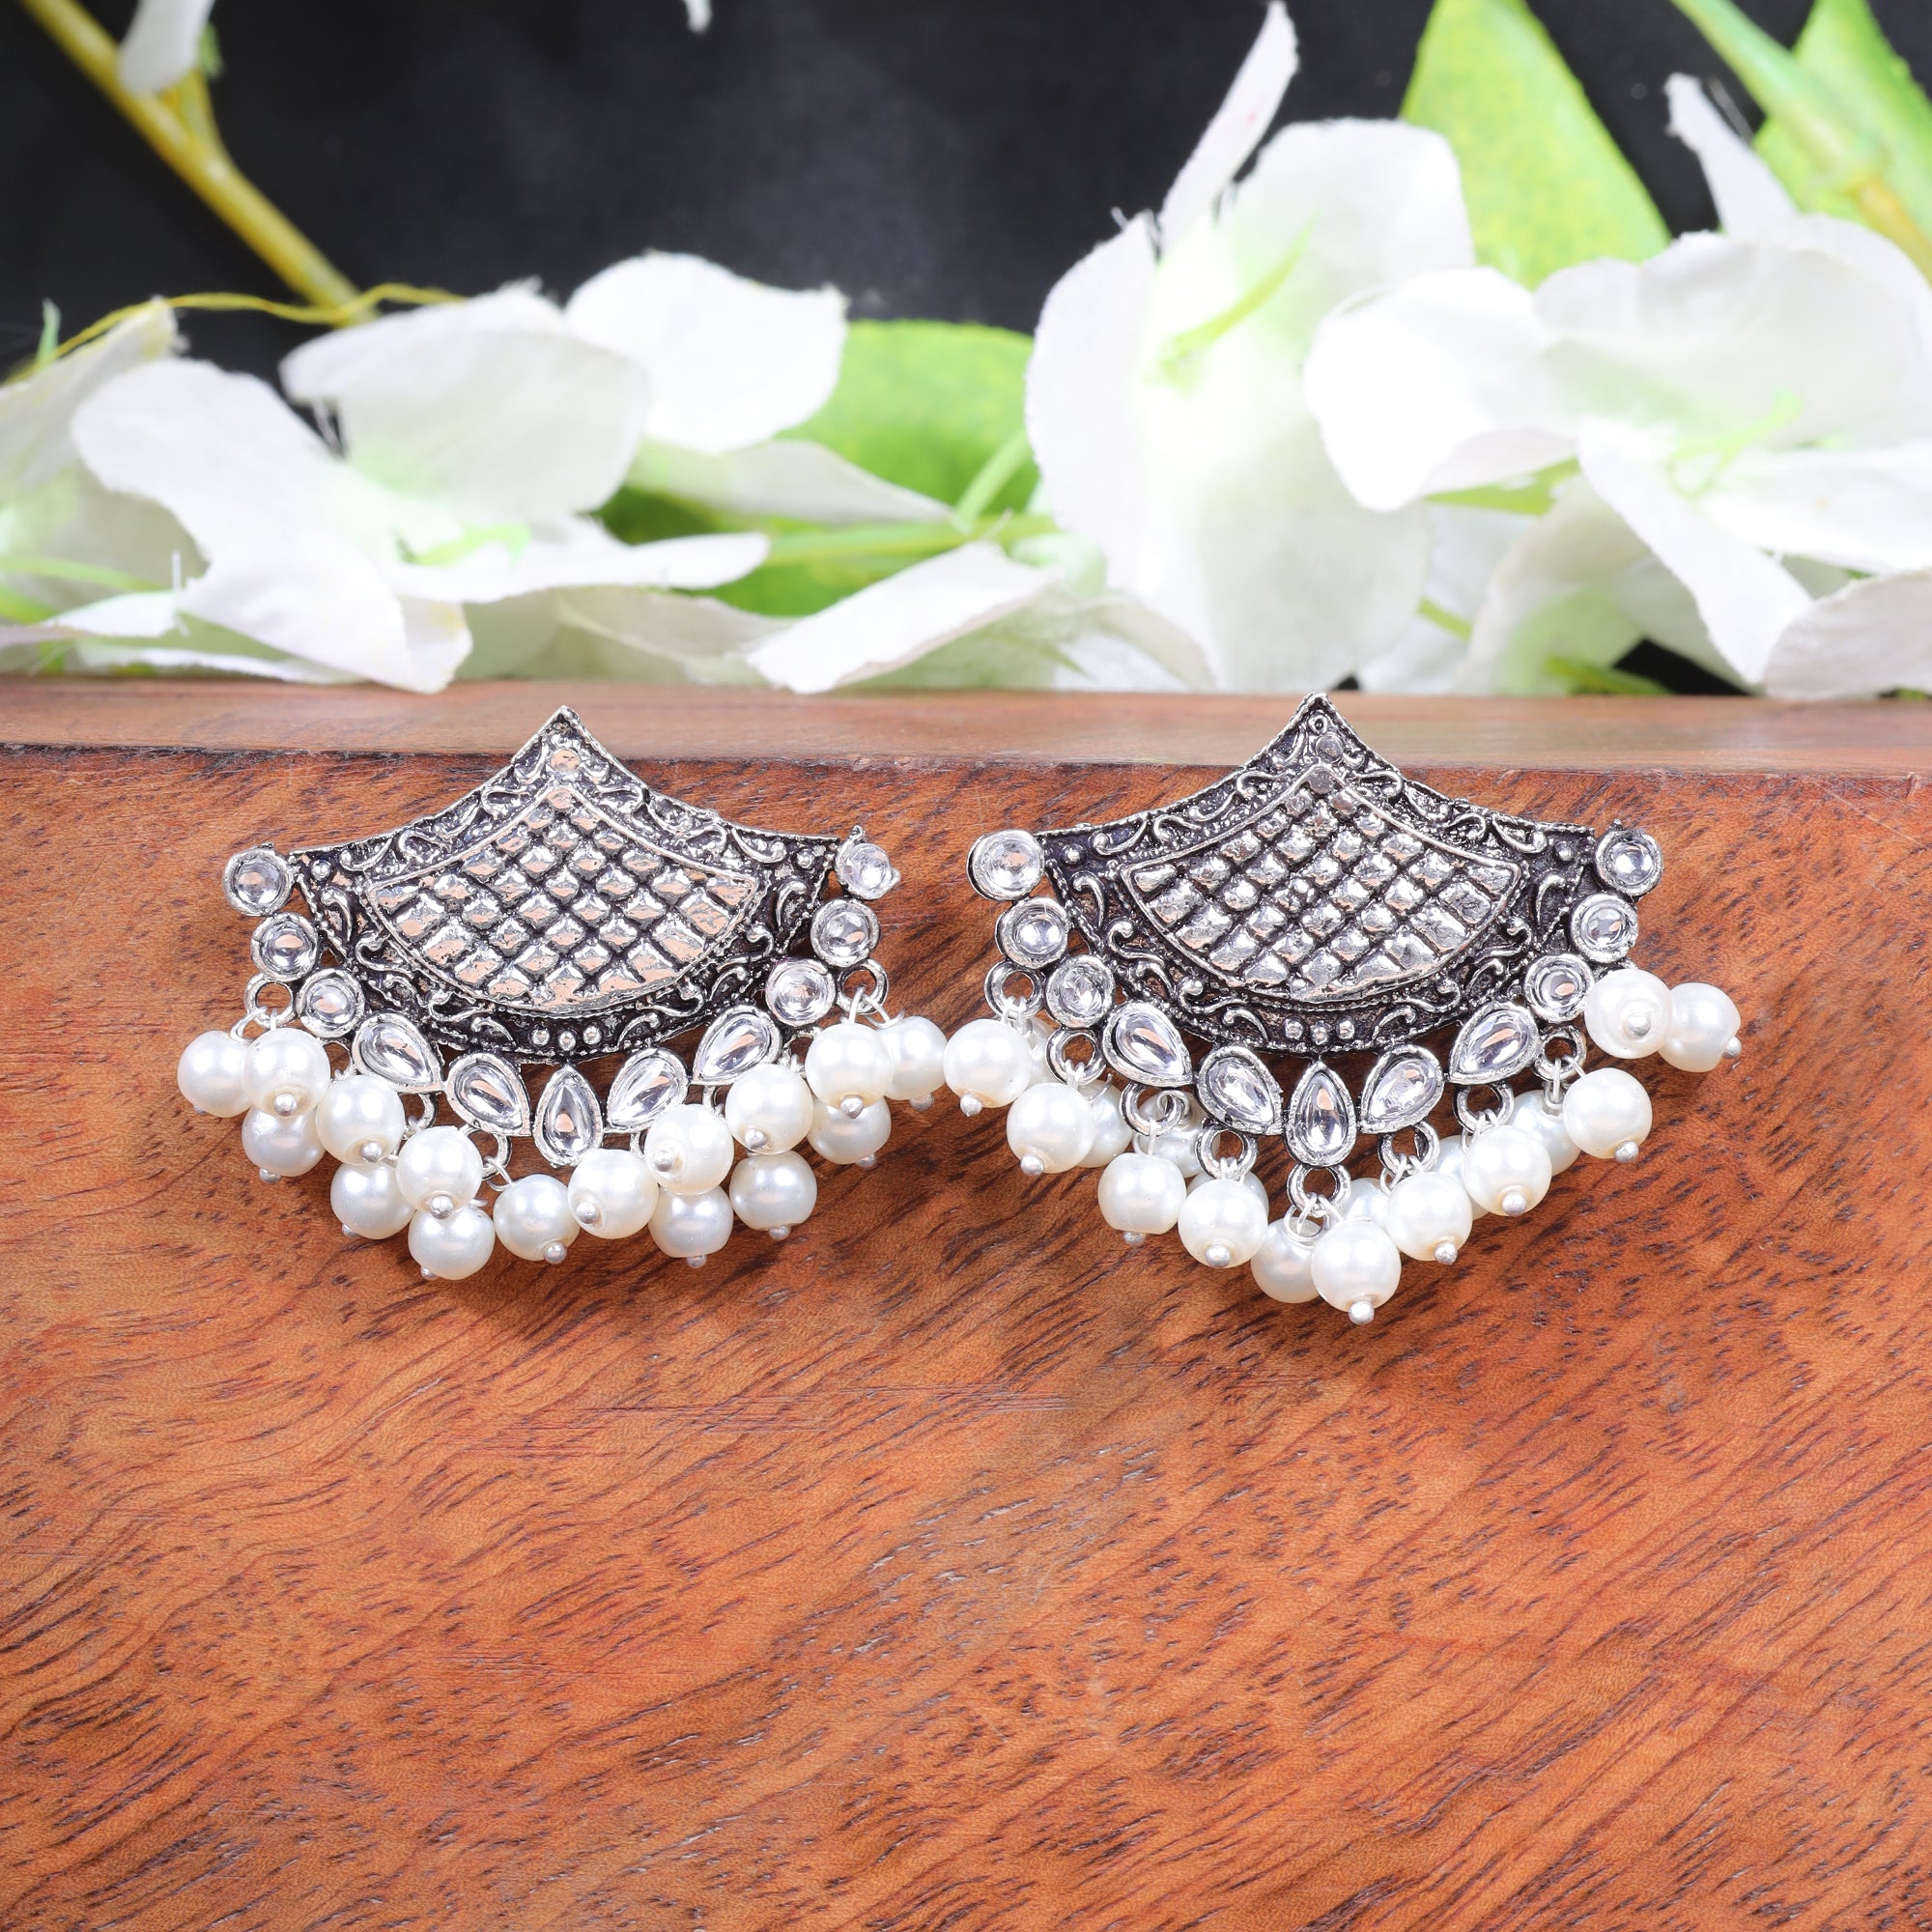 Flipkart.com - Buy KudiPatakha White Stone studded Oxidised Earrings with  hanging pearls Alloy Earring Set Online at Best Prices in India